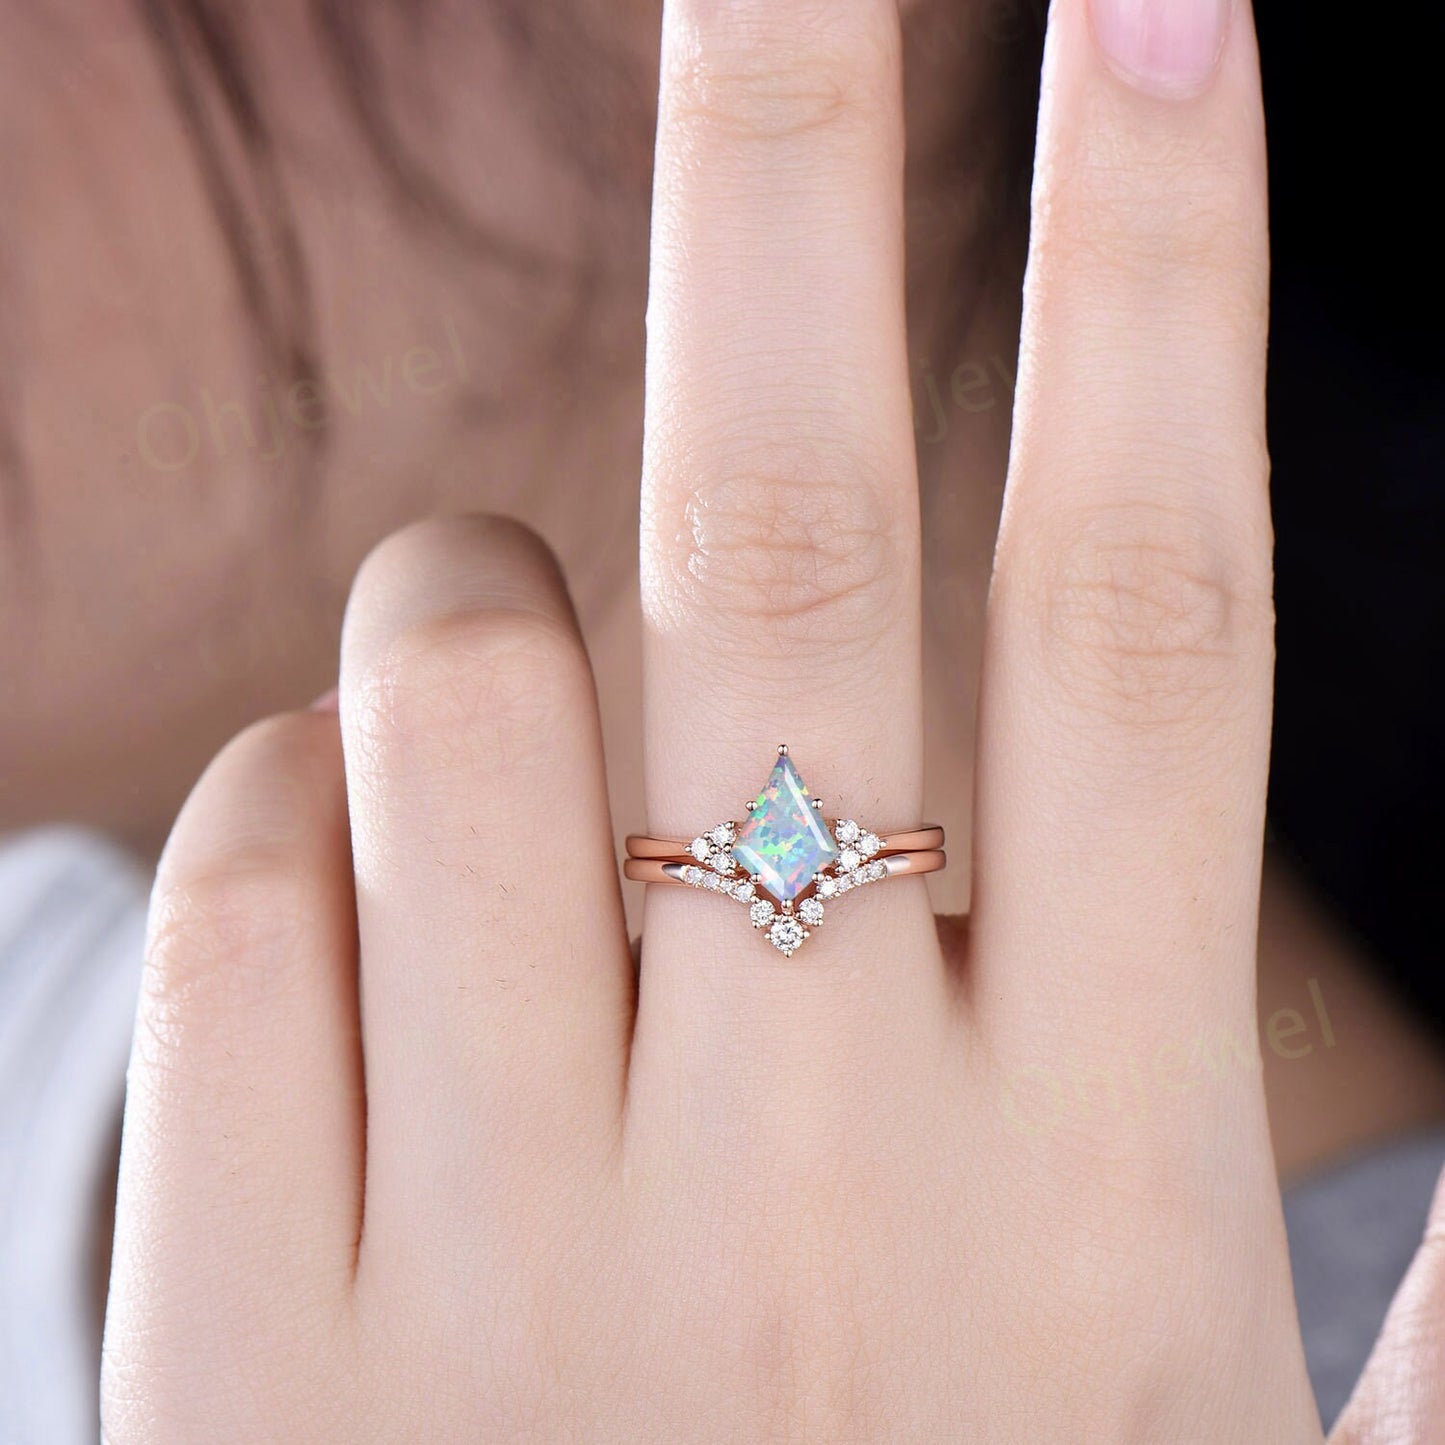 White opal ring dainty kite cut opal engagement ring set solid 14k rose gold 6 prong diamond ring Minimalist unique anniversary ring women